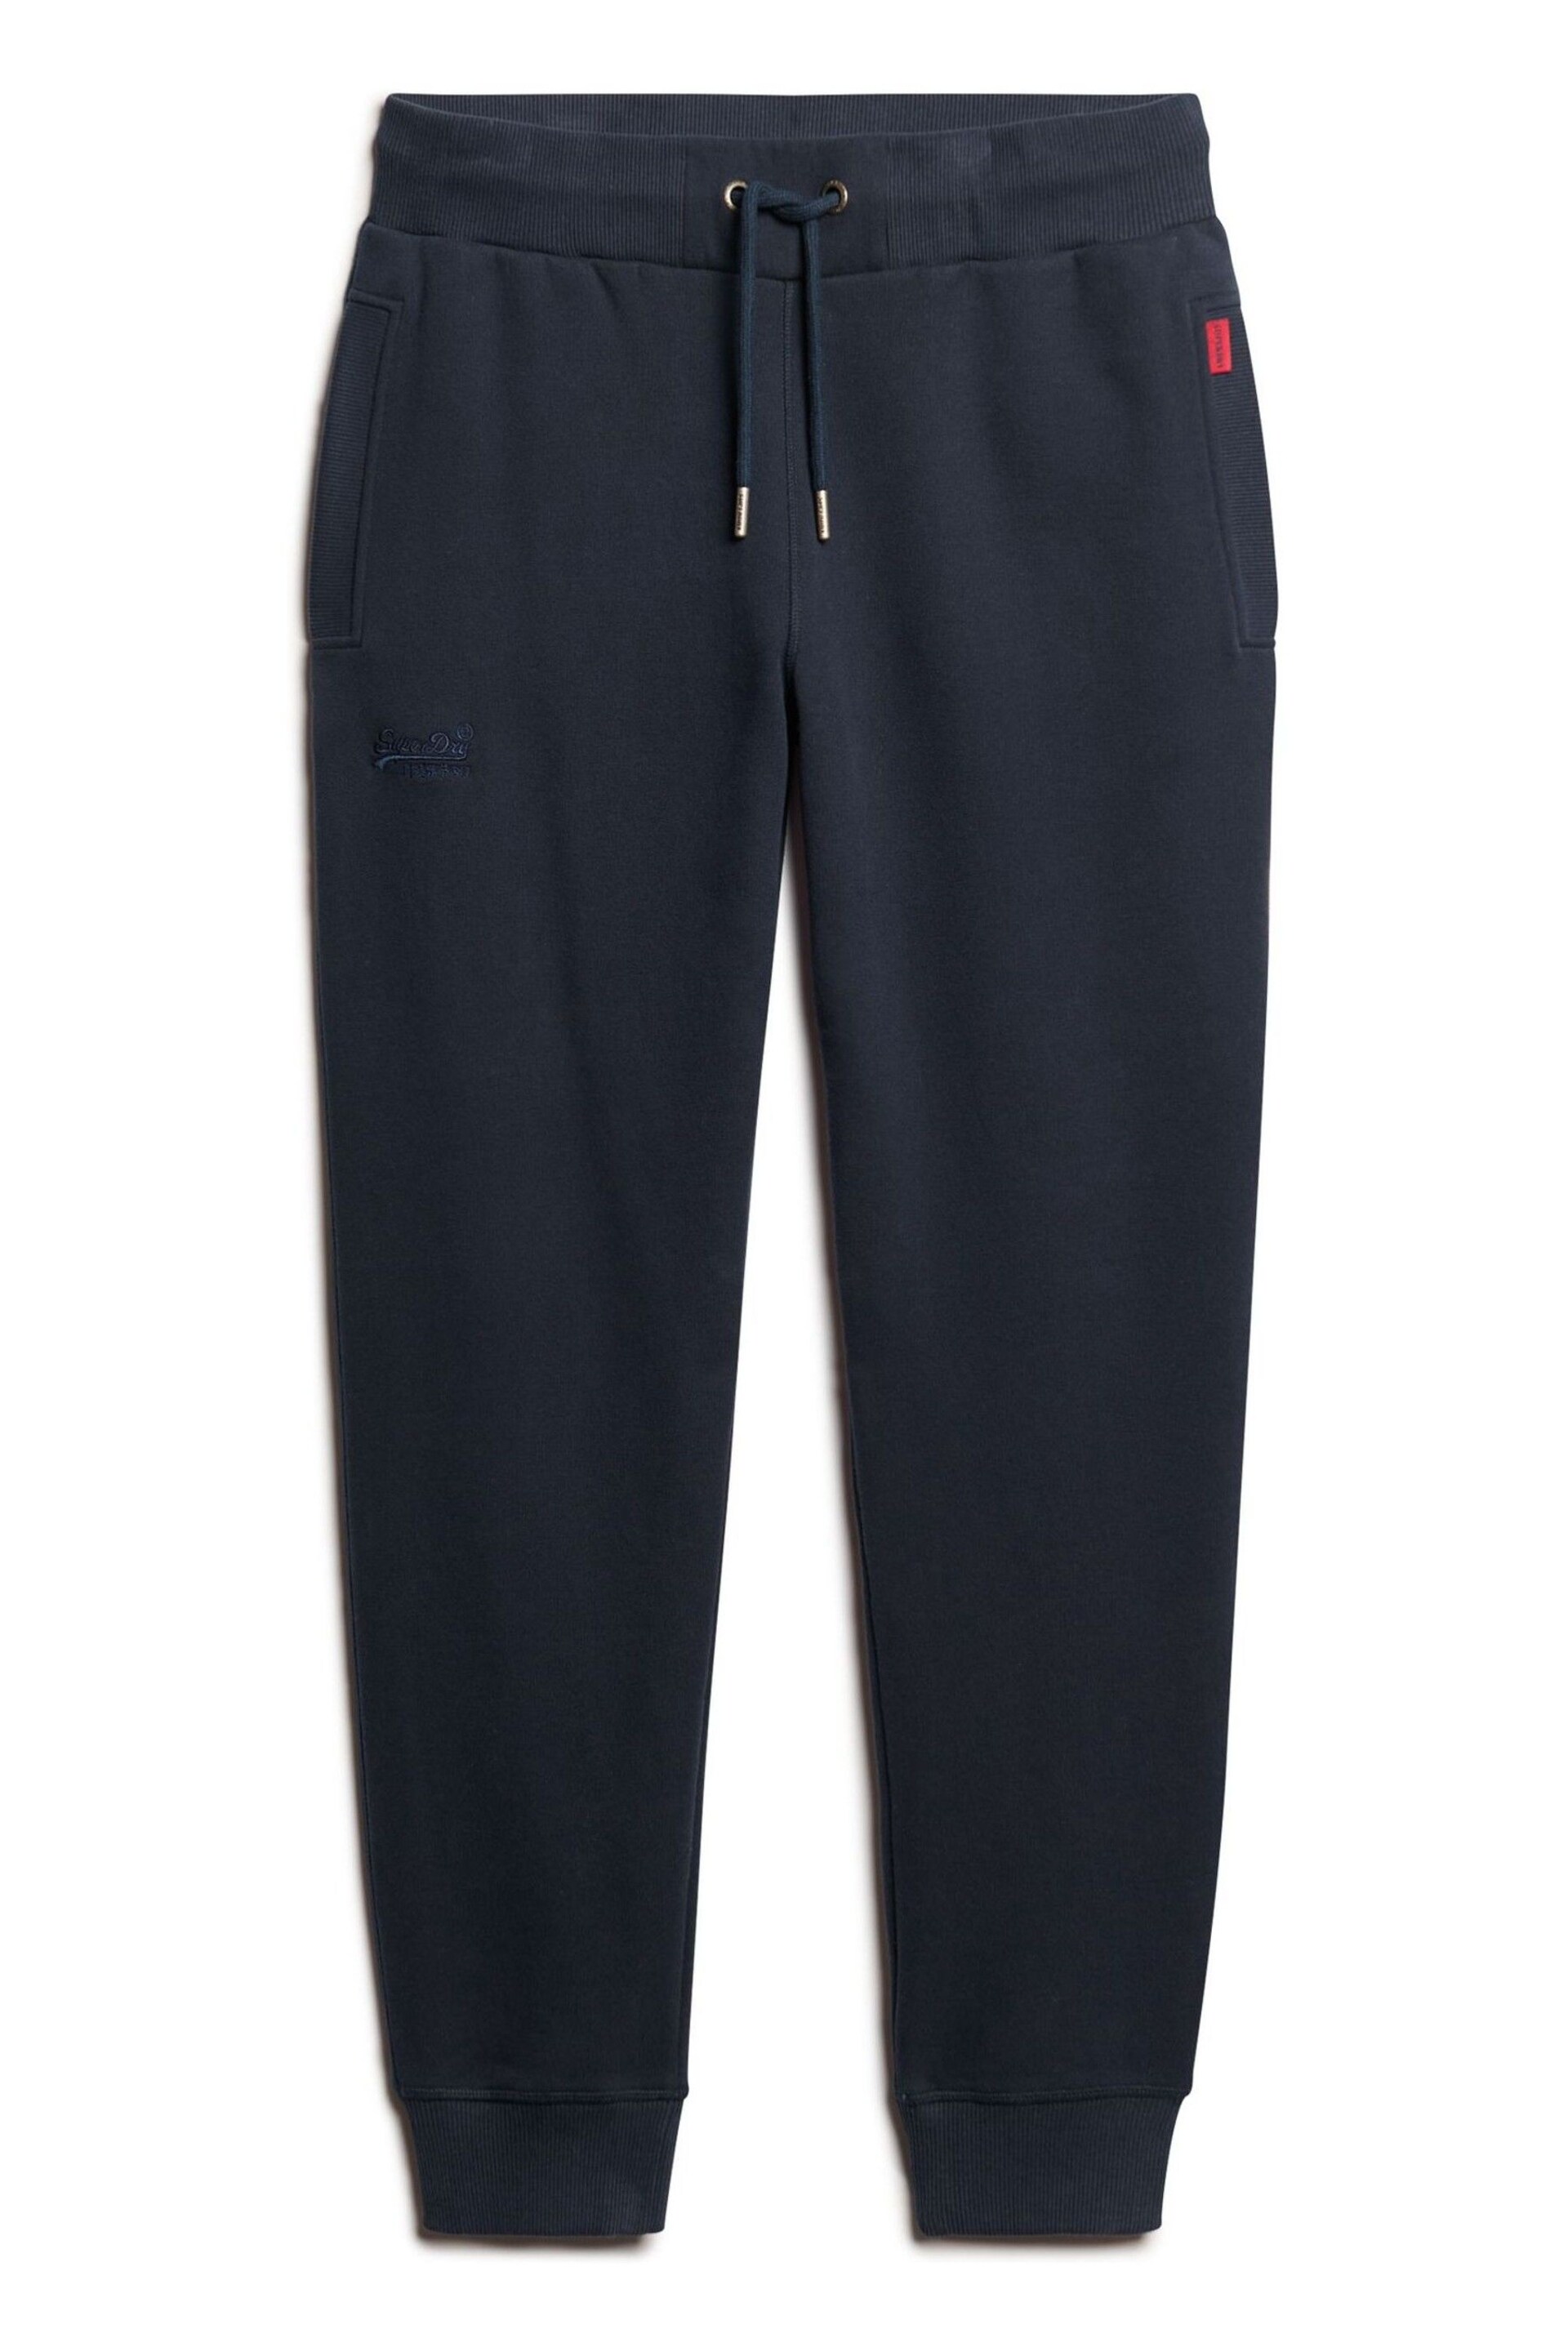 Superdry Navy Blue Essential Logo Joggers - Image 5 of 7